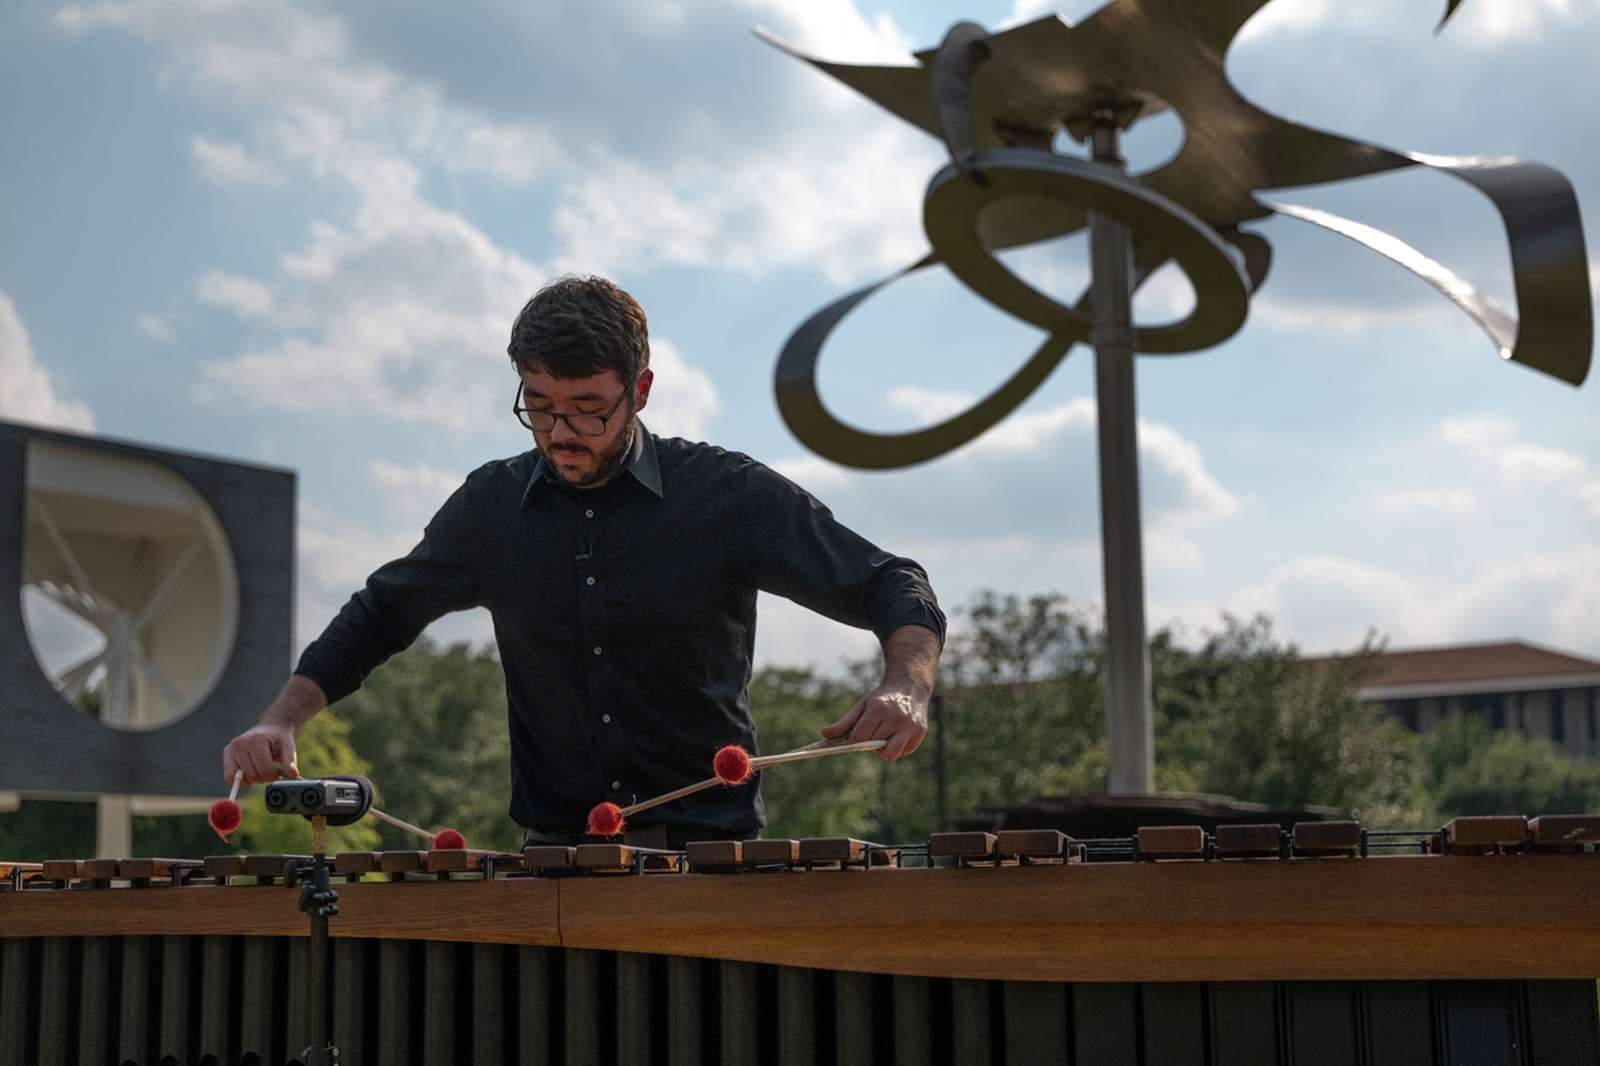 Shepherd School percussionist Aaron Smith performs a new composition by Shepherd School composer Theo Chandler inspired by Mark di Suvero's Po-um (Lyric) (2003). Photo by Daniel Ortiz.